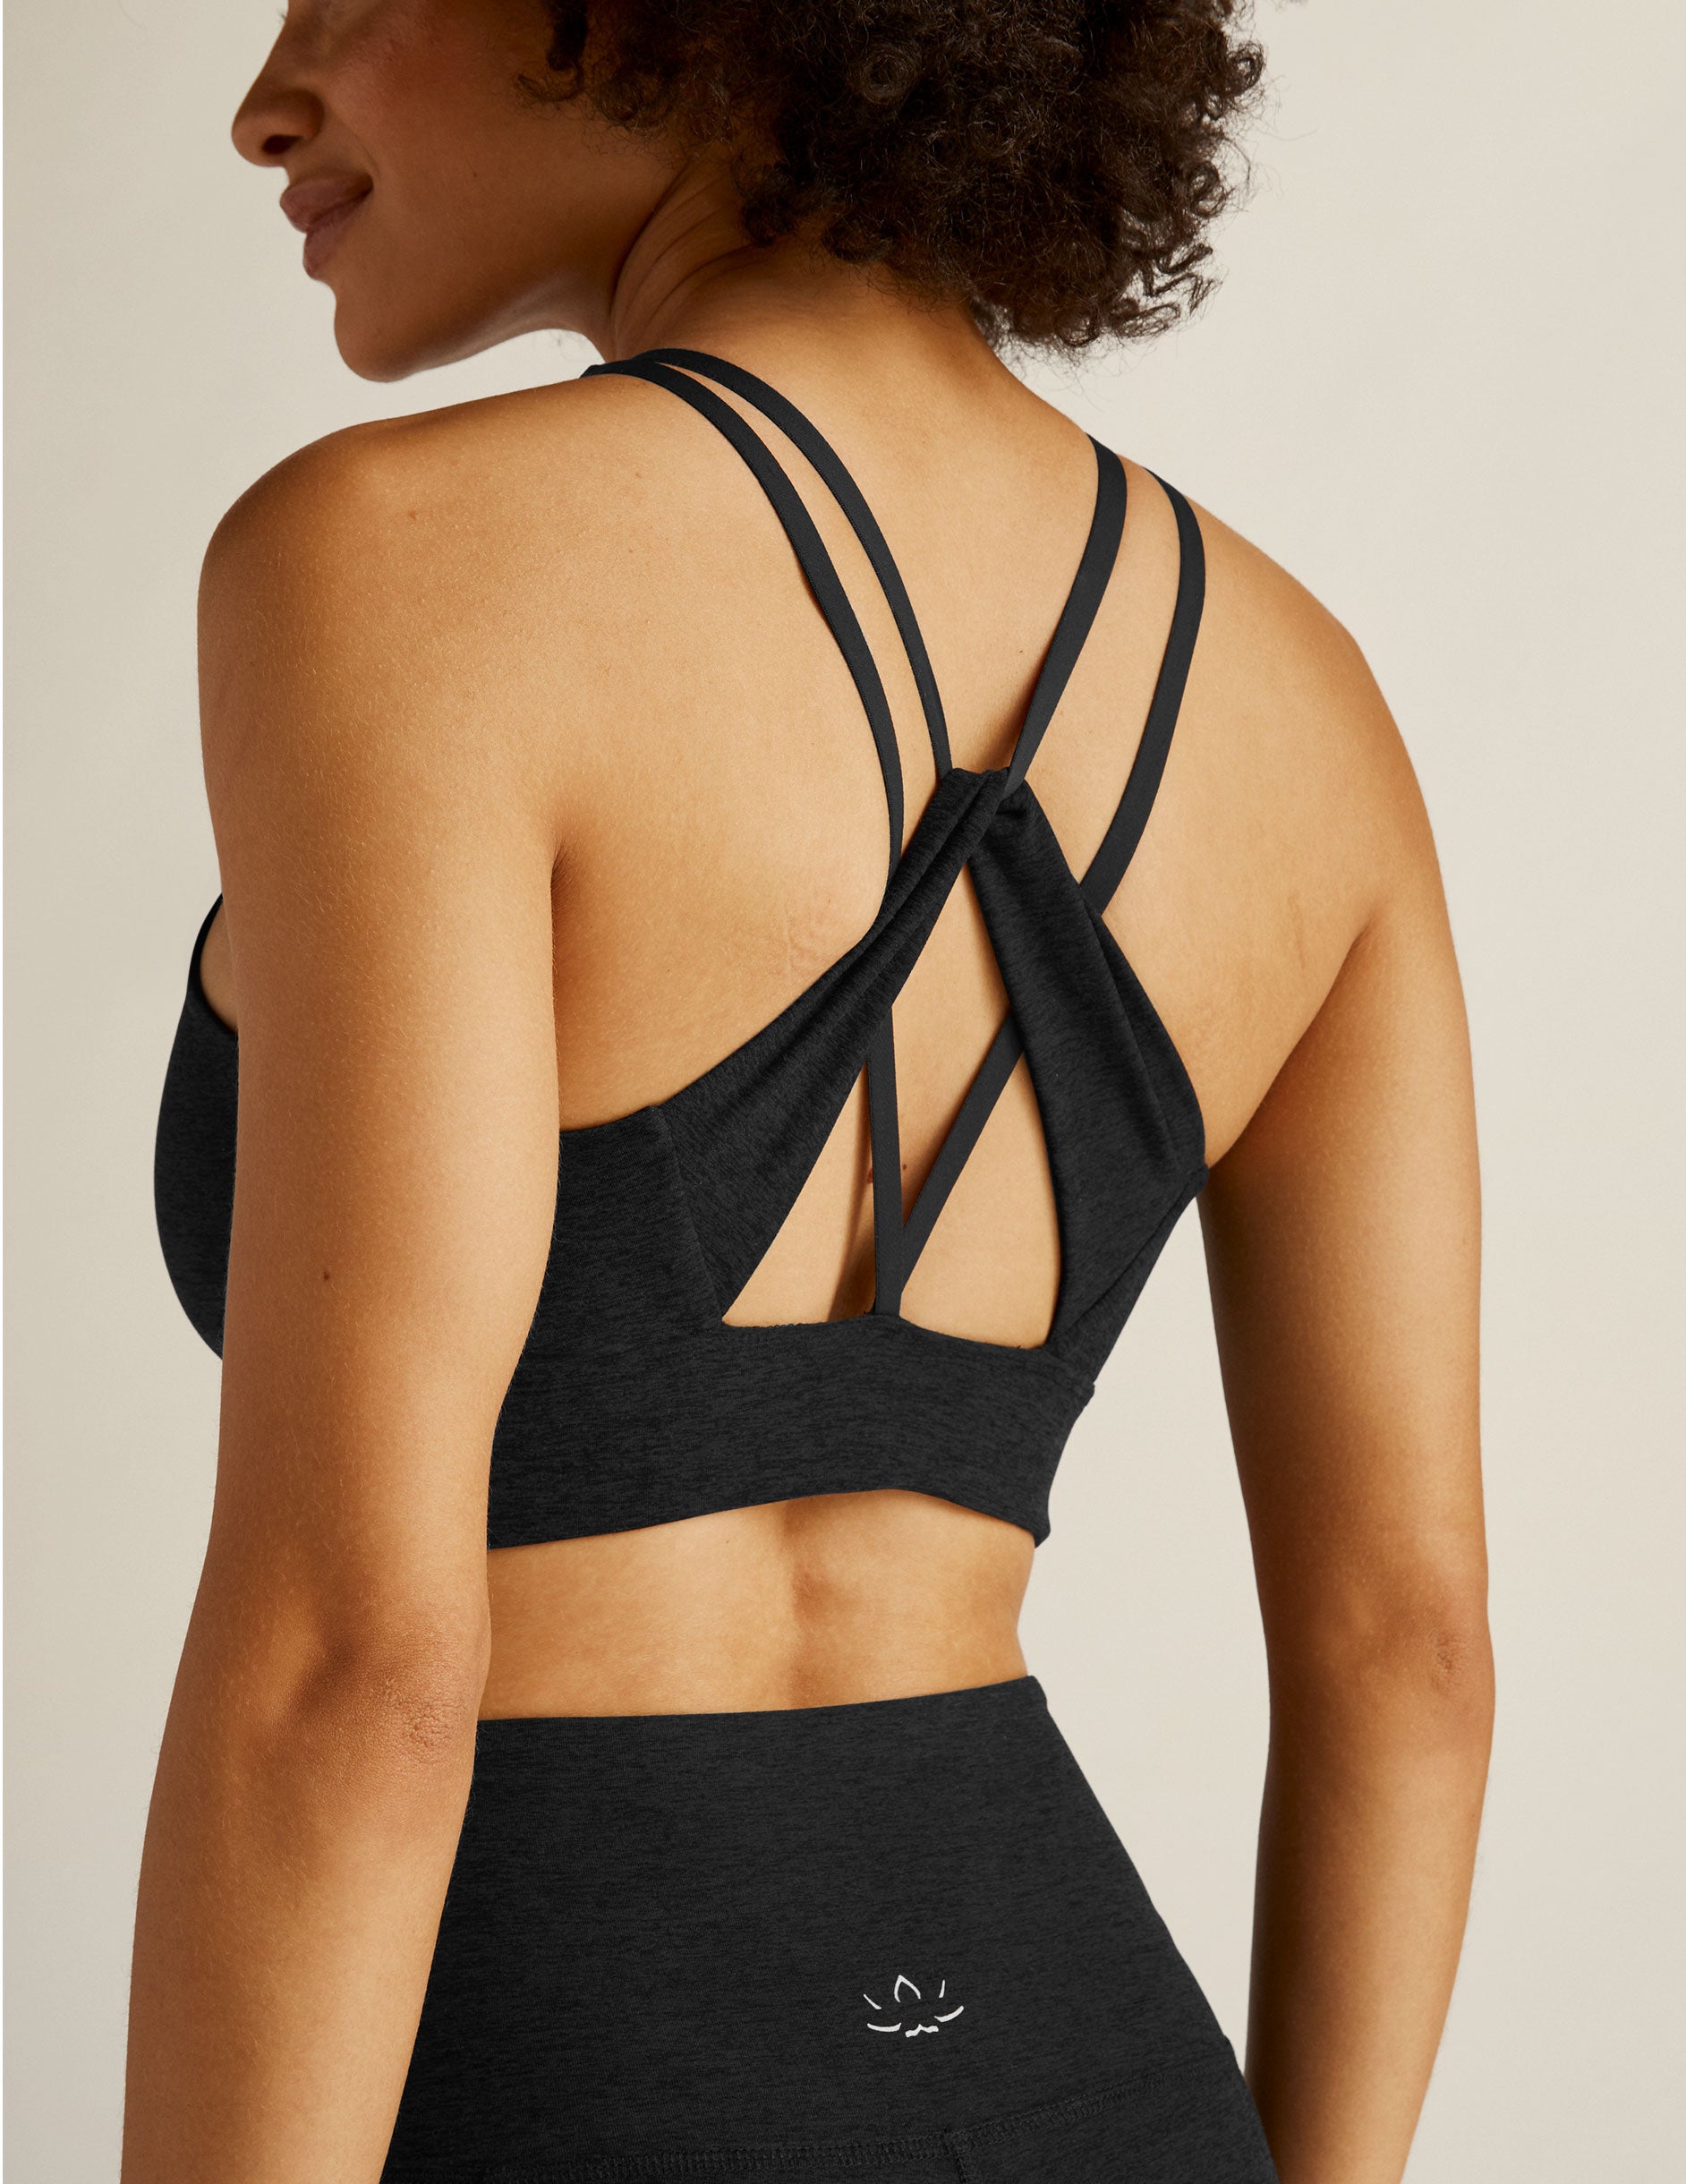 Core Products Elastic Criss Cross Back Support - XLarge